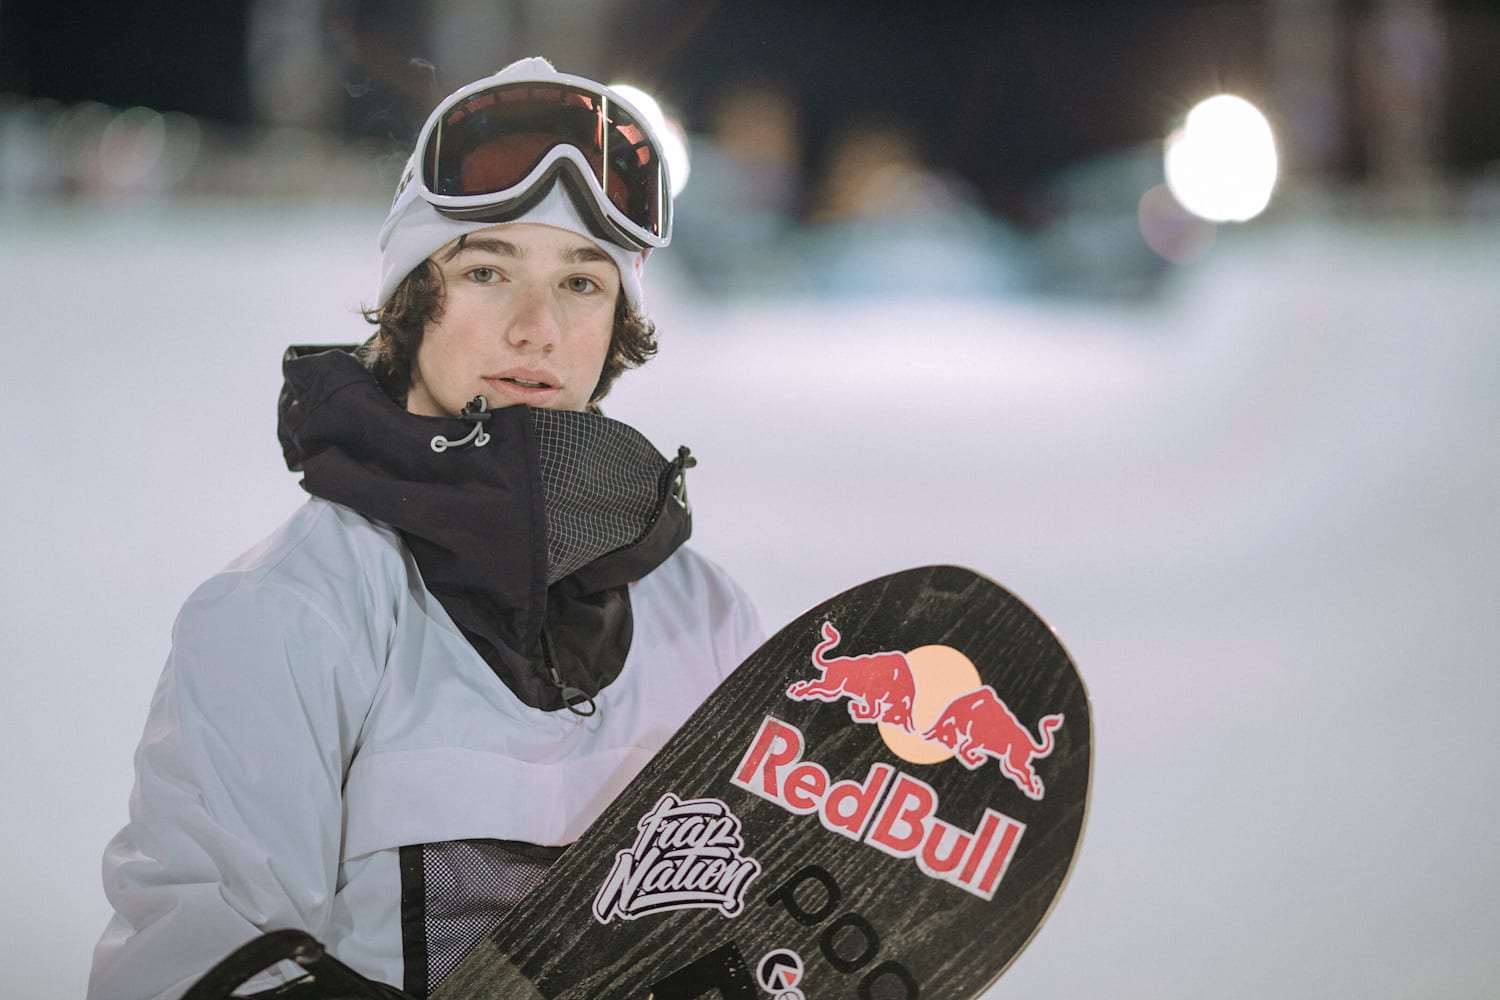 Toby Miller Snowboarding Red Bull Athlete Page